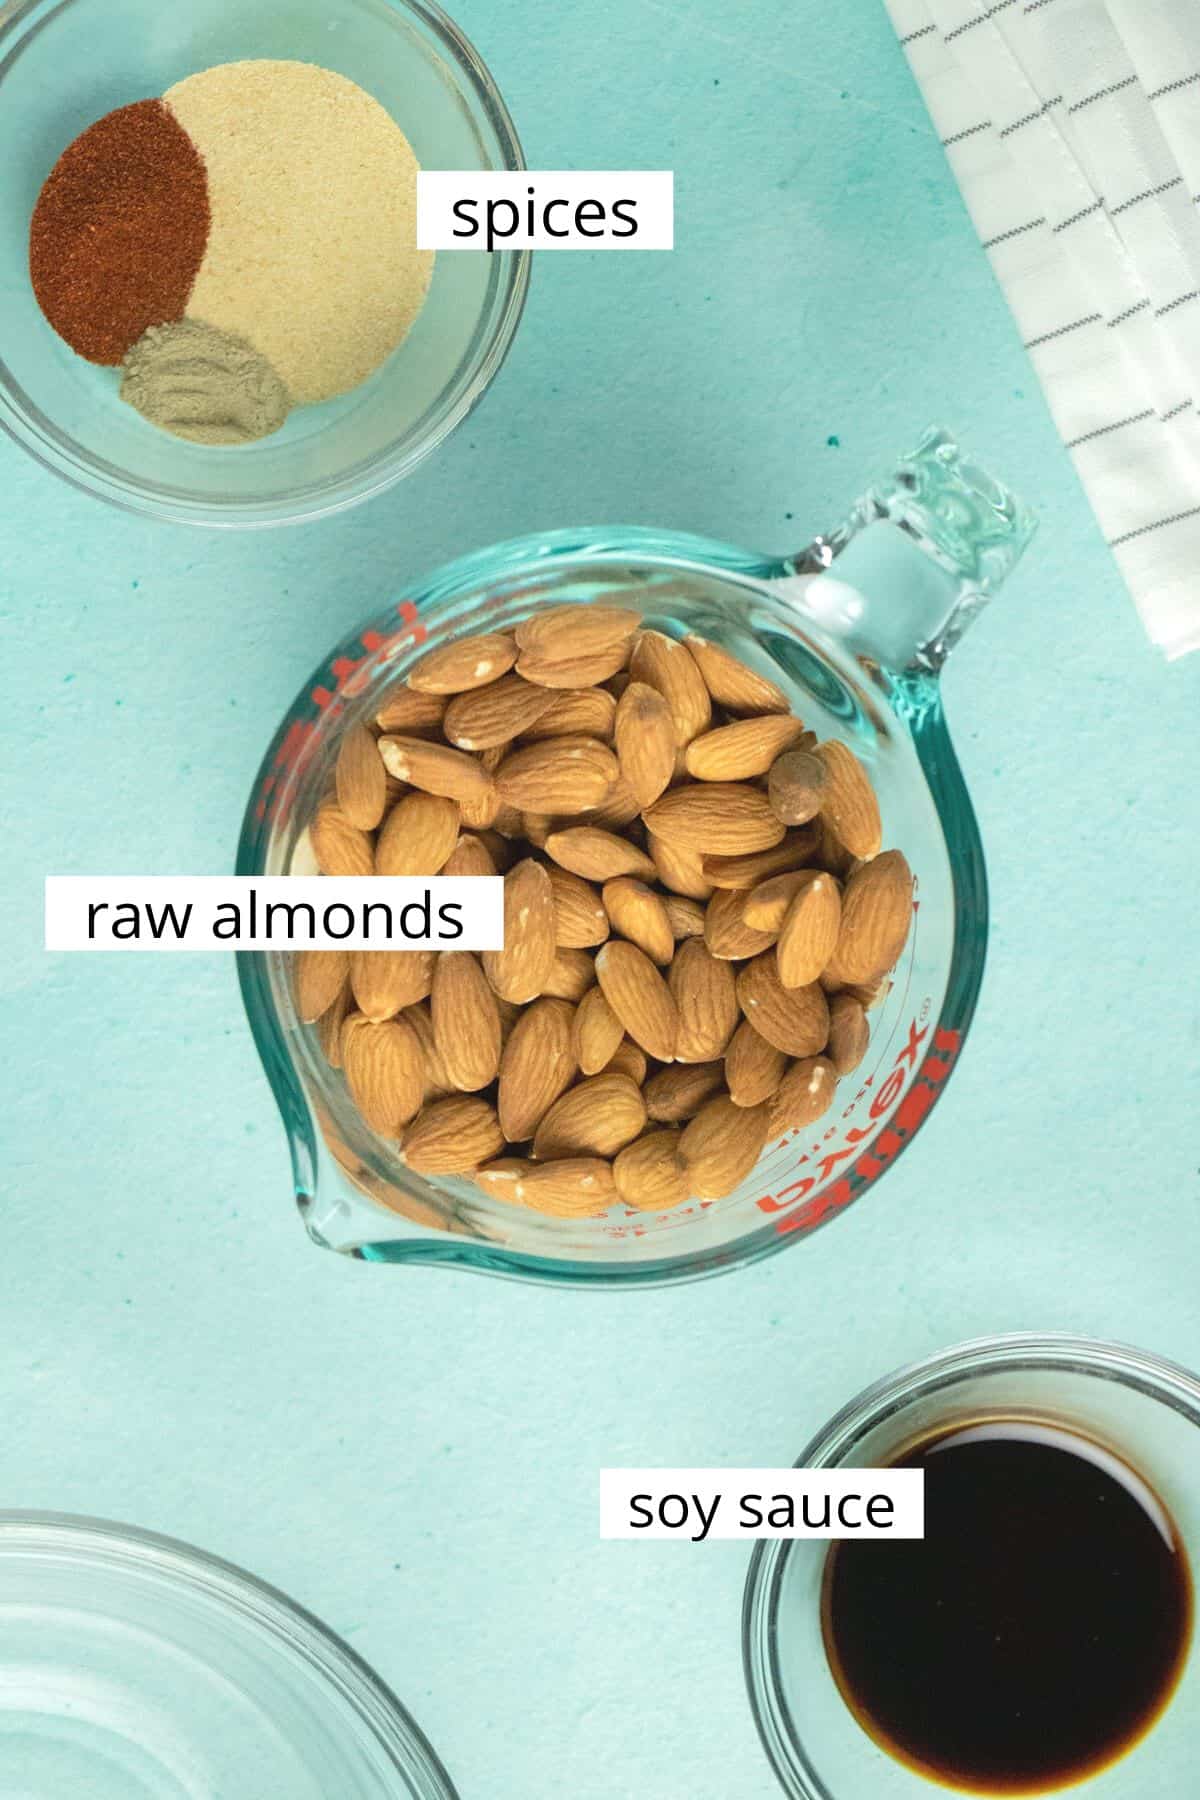 image collage showing spices, almonds, and soy sauce in bowls on a blue table with text labels on each